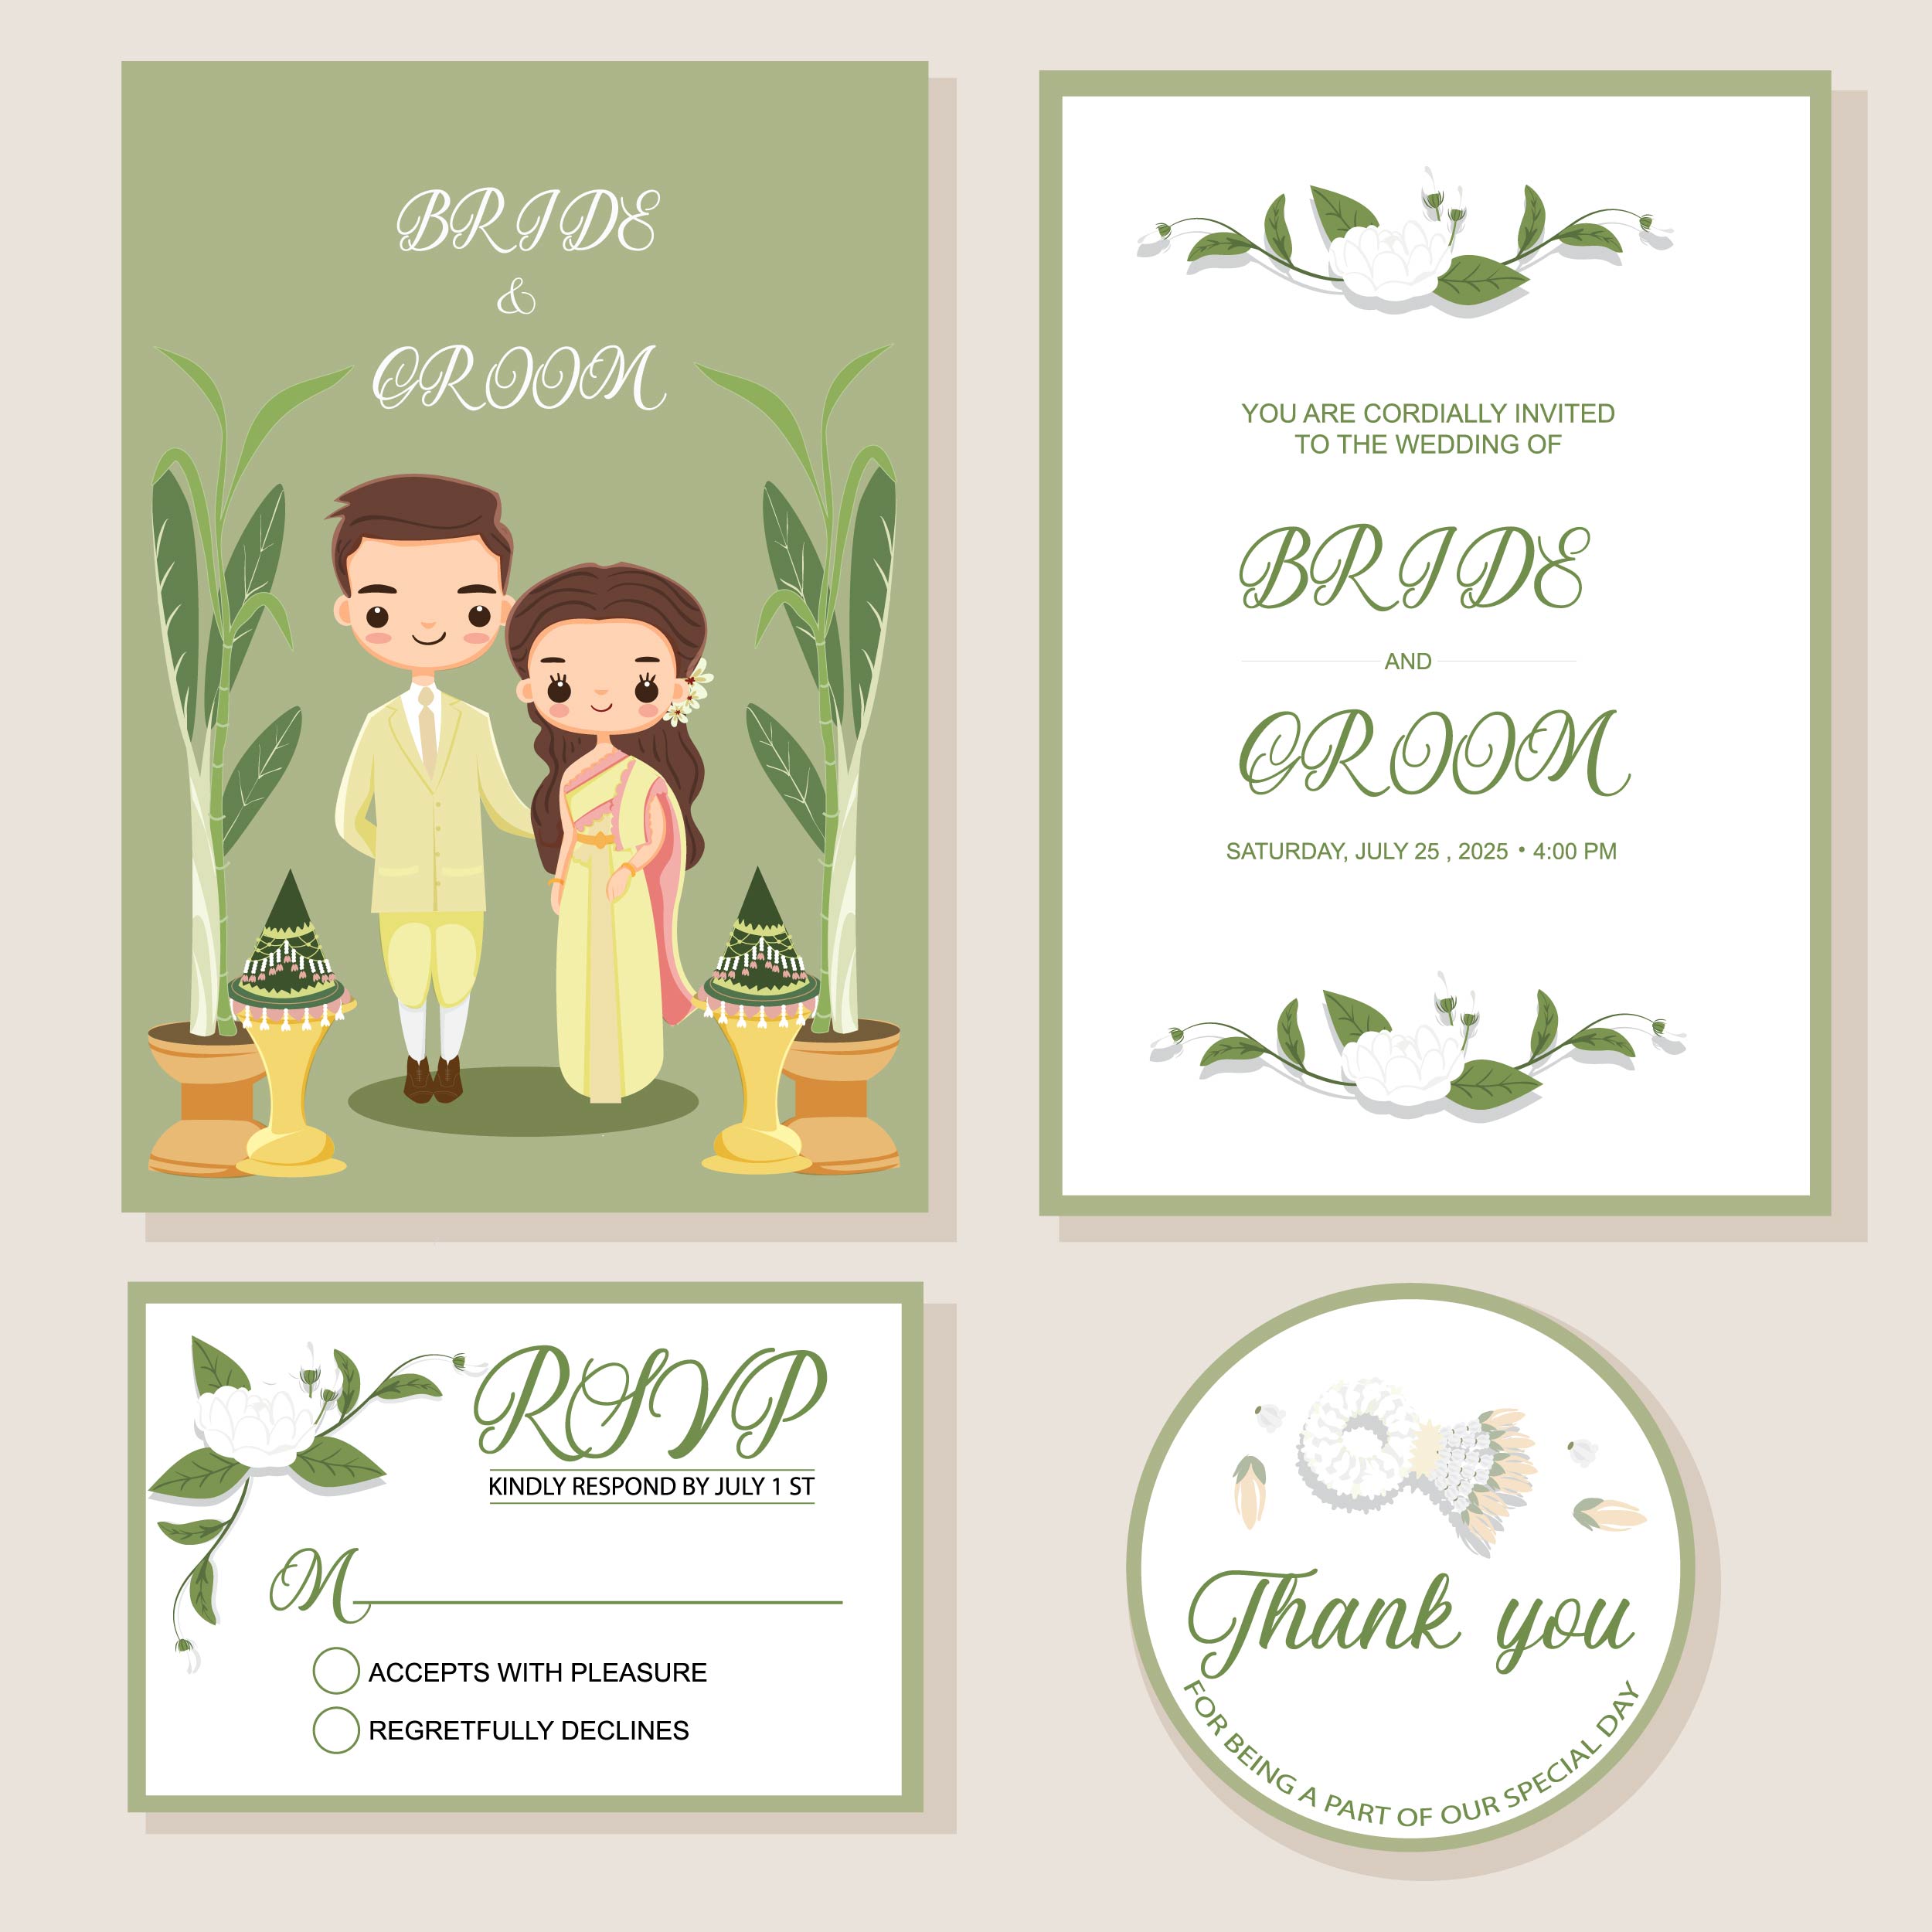 https://static.vecteezy.com/system/resources/previews/000/647/330/original/vector-cute-thai-bride-and-groom-couple-on-wedding-invitations-card-template.jpg